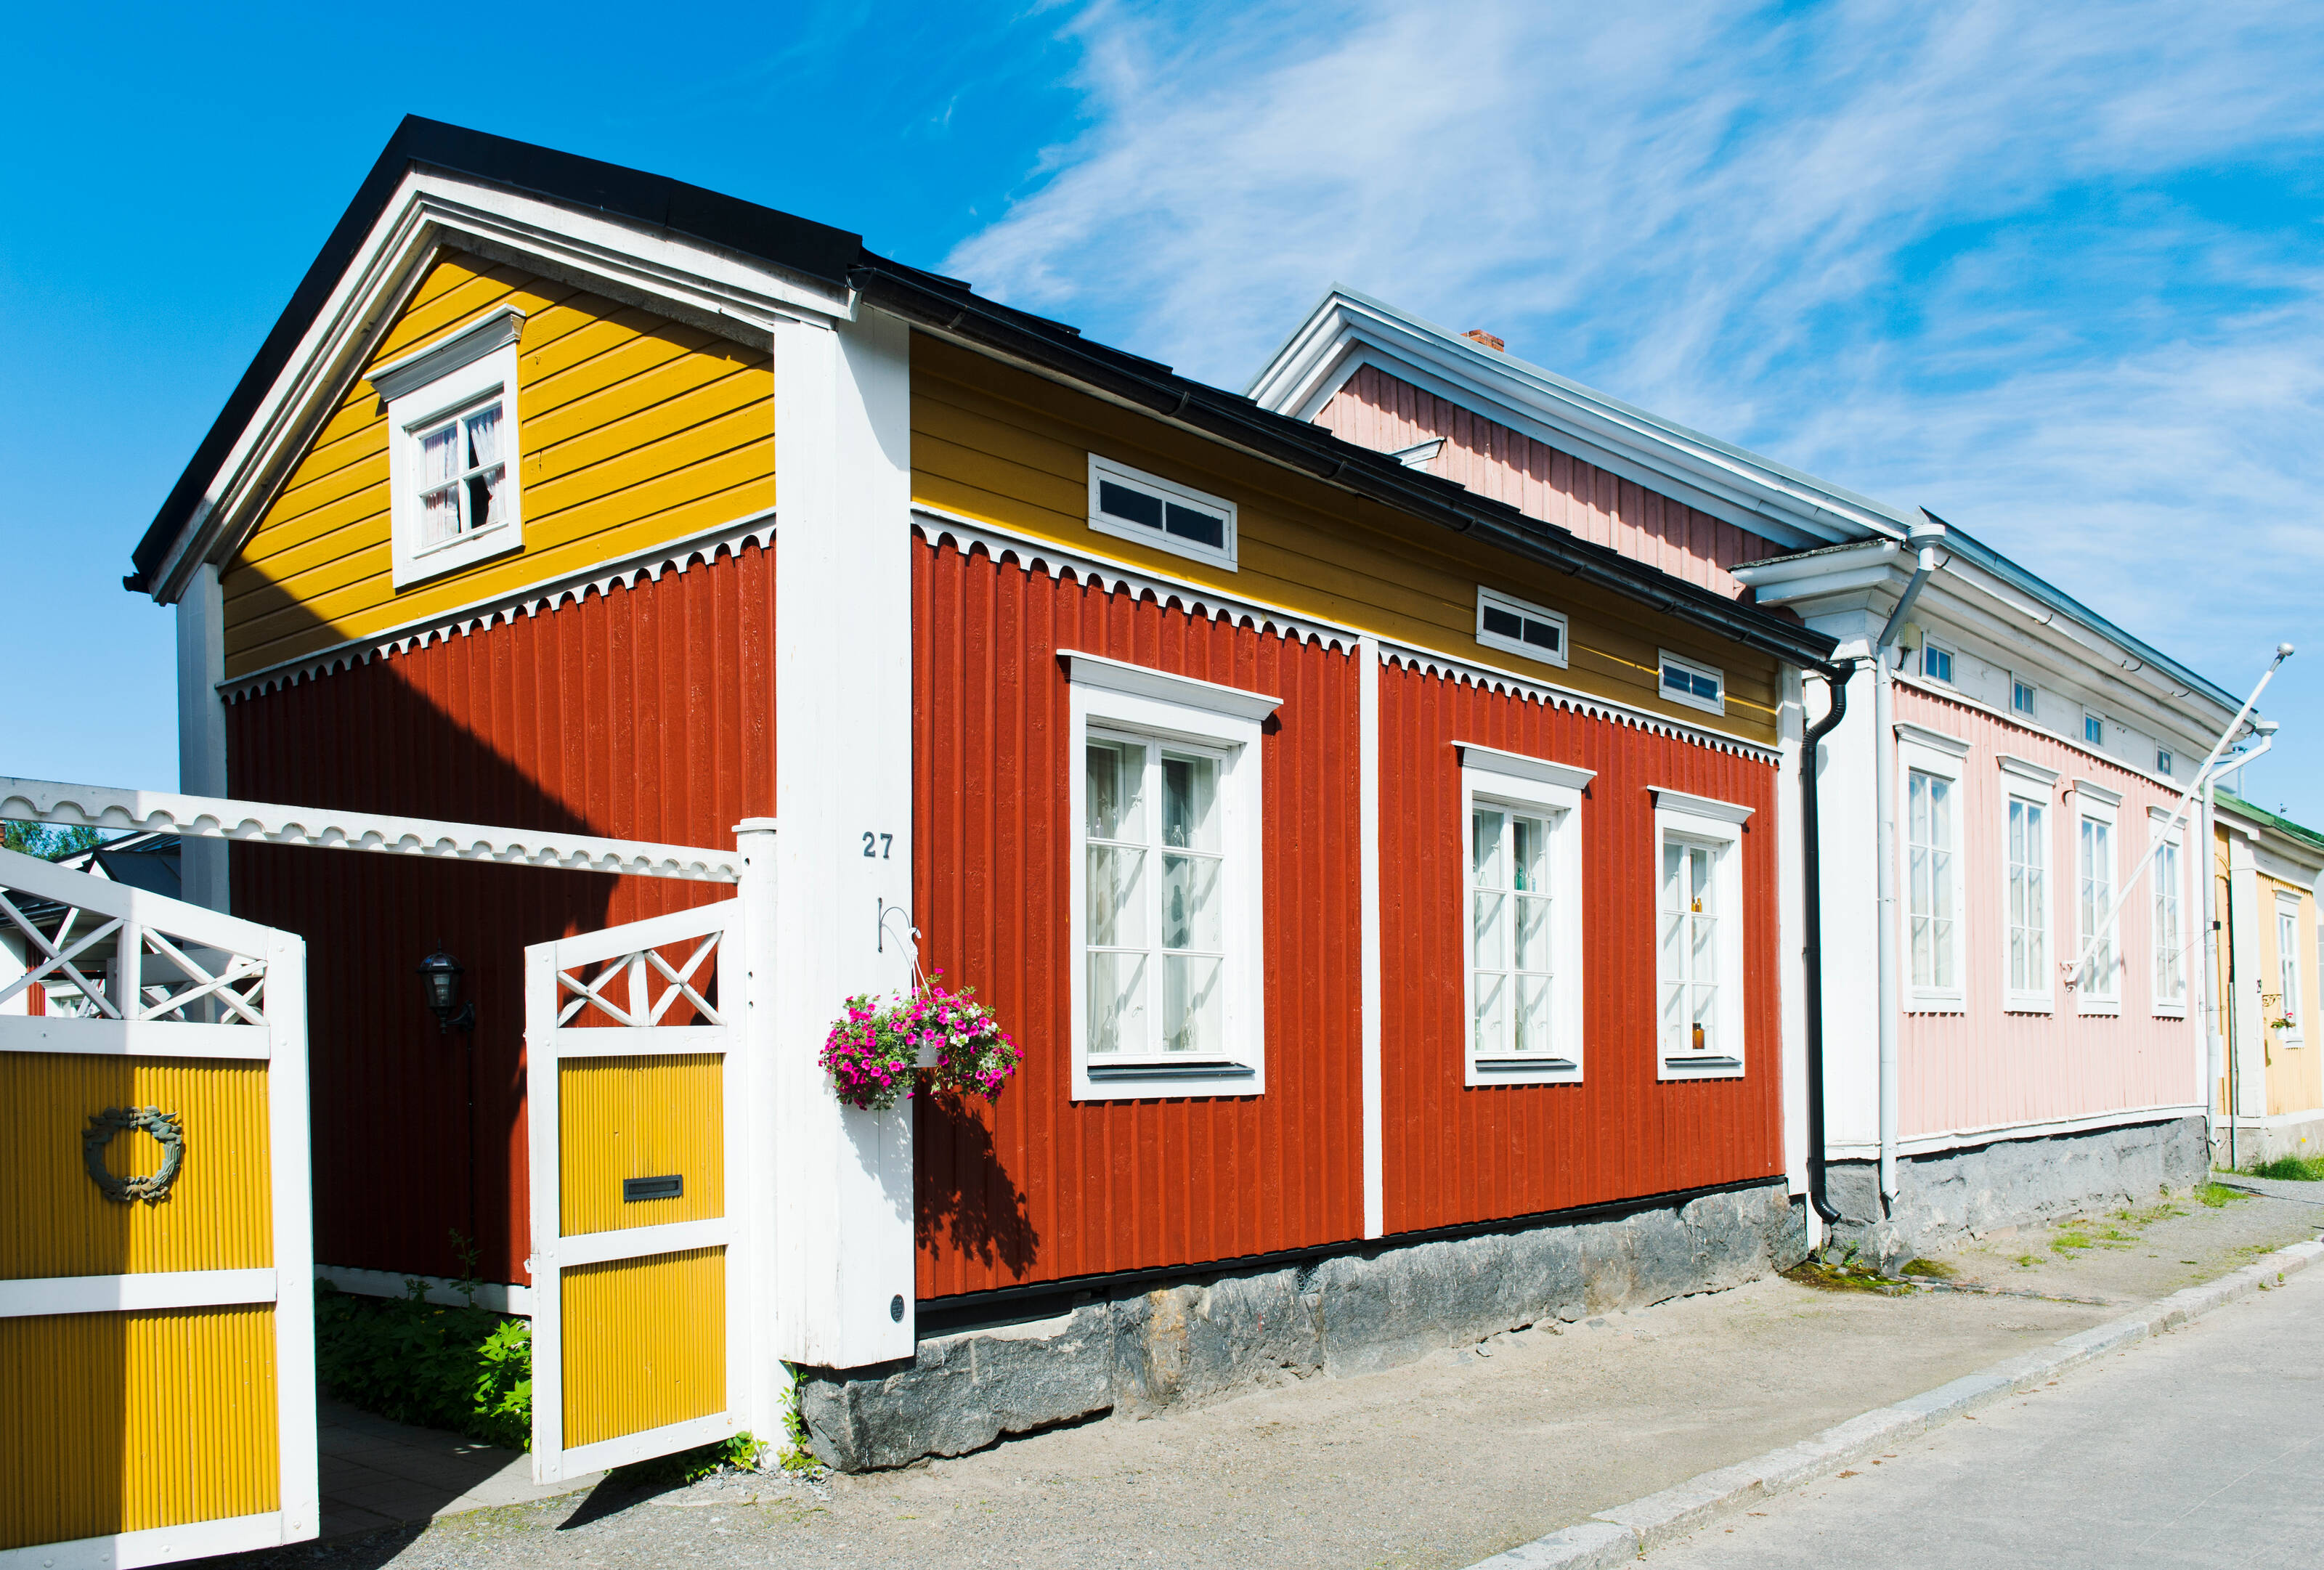 Colourful wooden buildings 